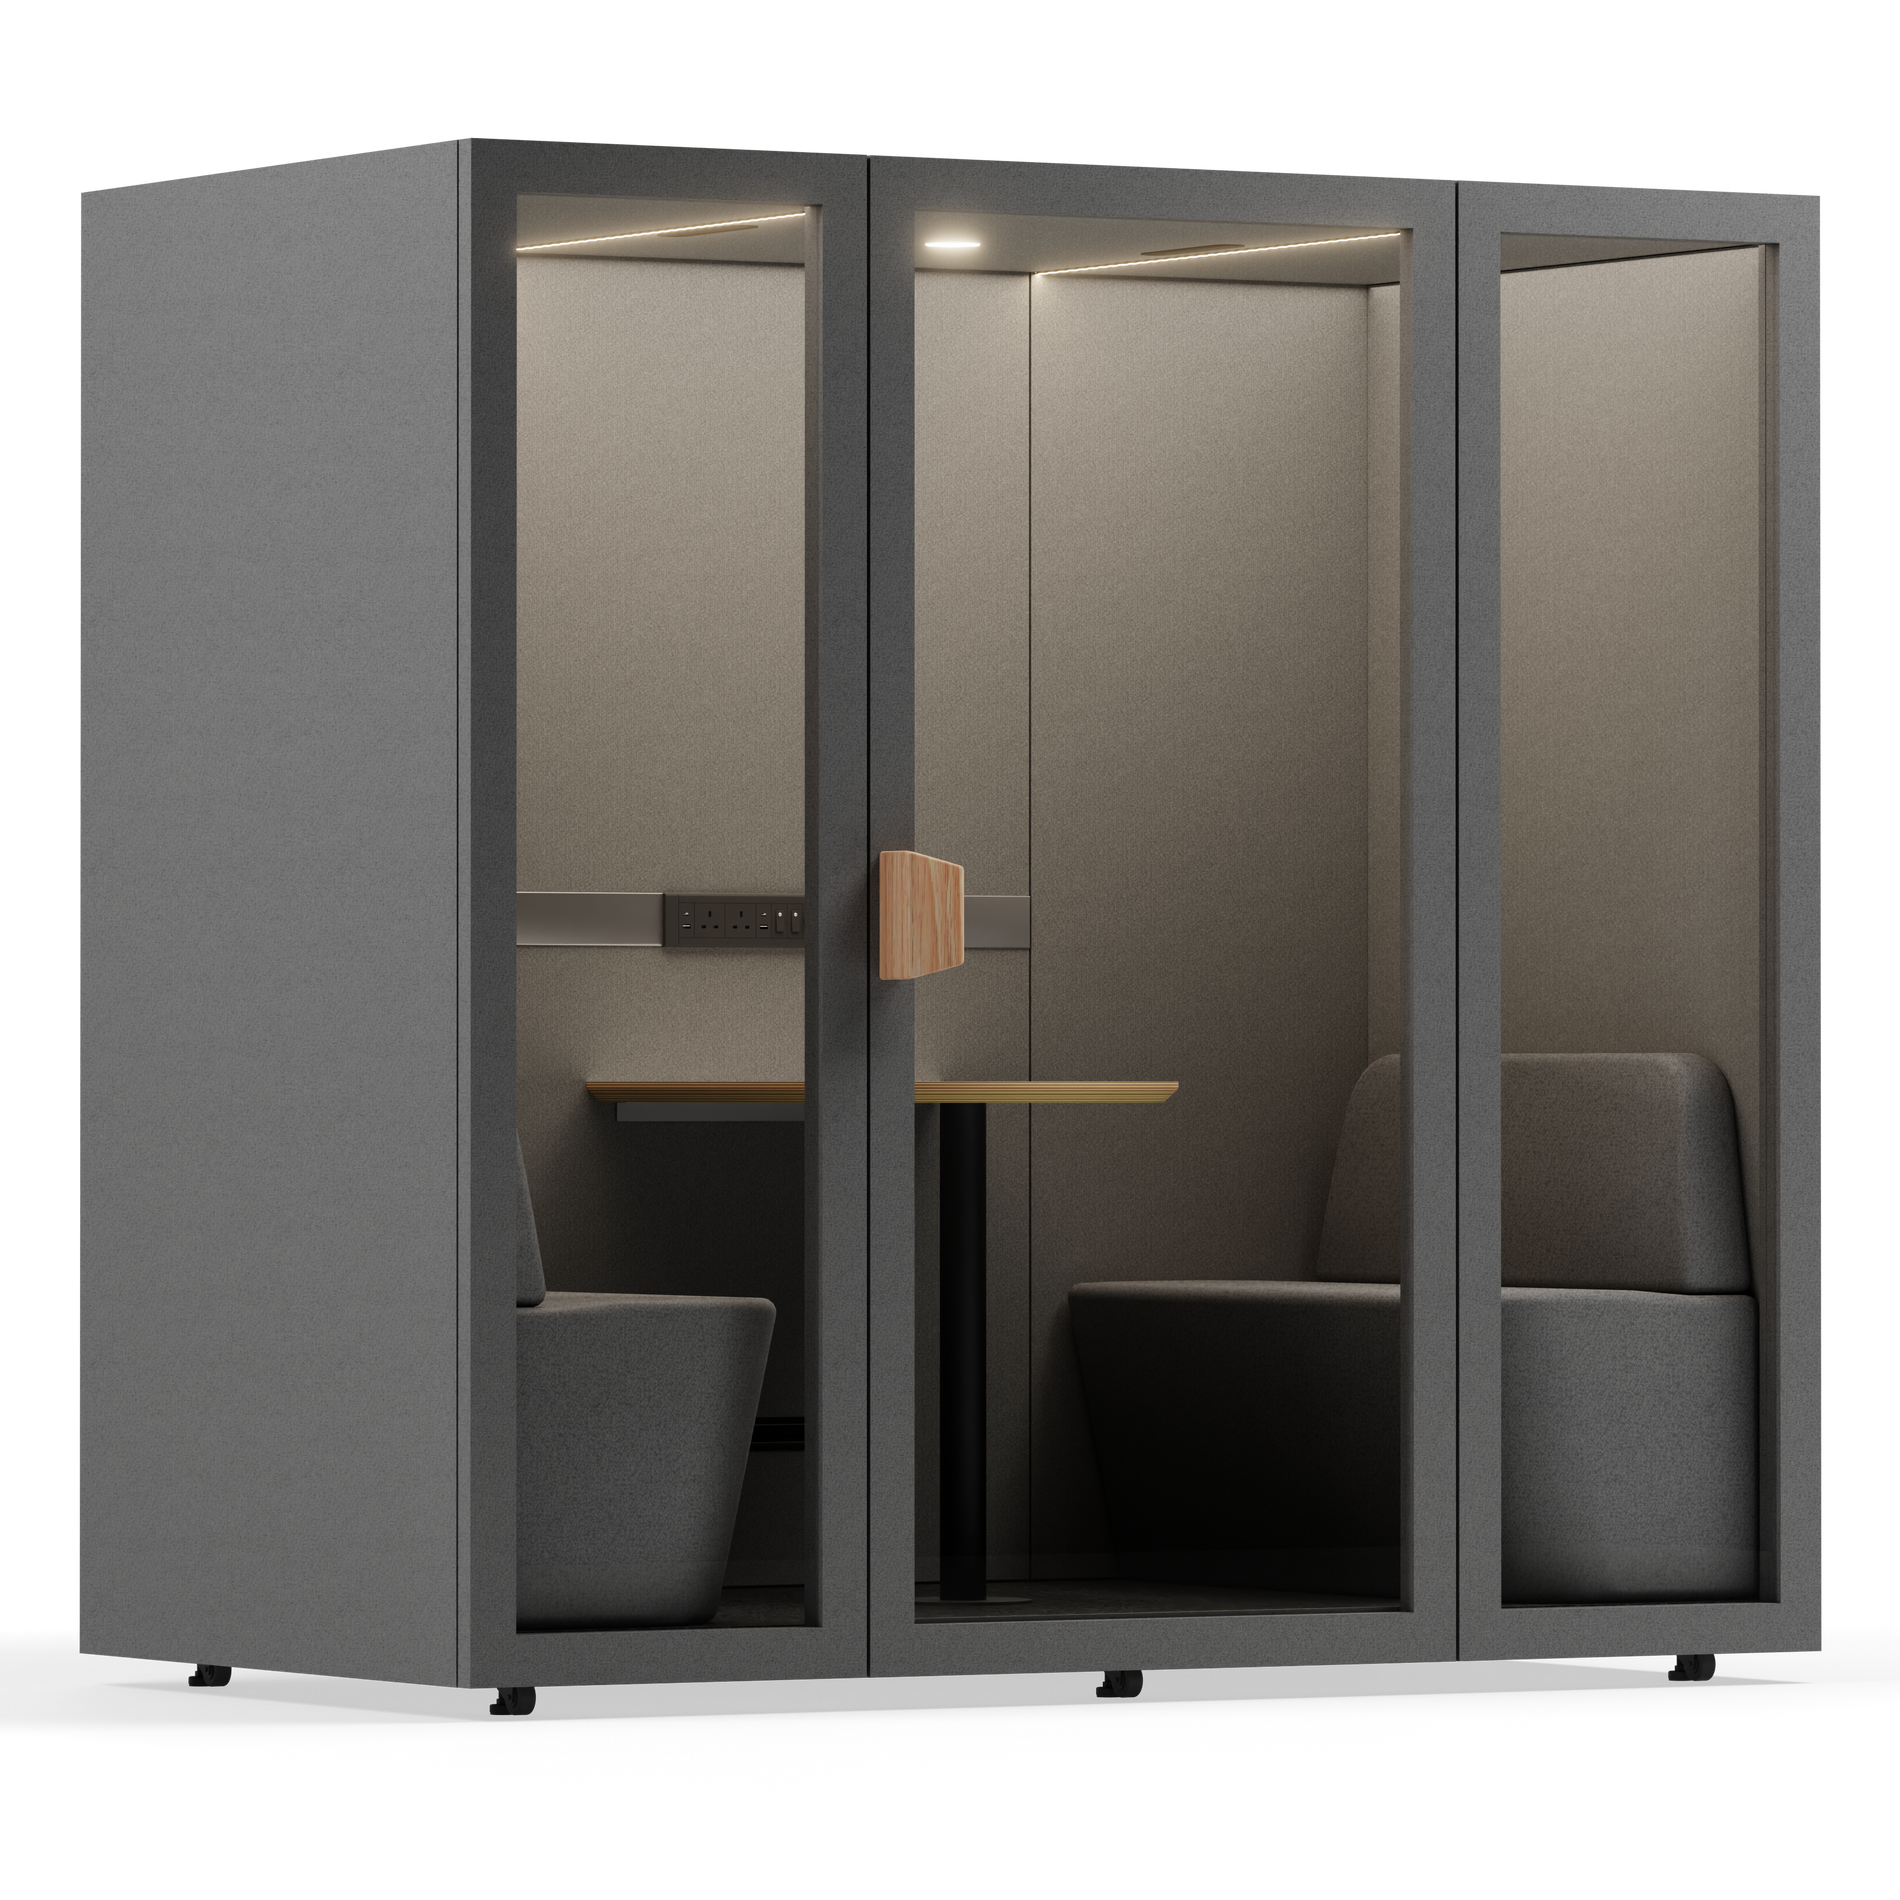 2 - 4 Person Meeting BoothFolio Dark Grey / Furniture As Per Images